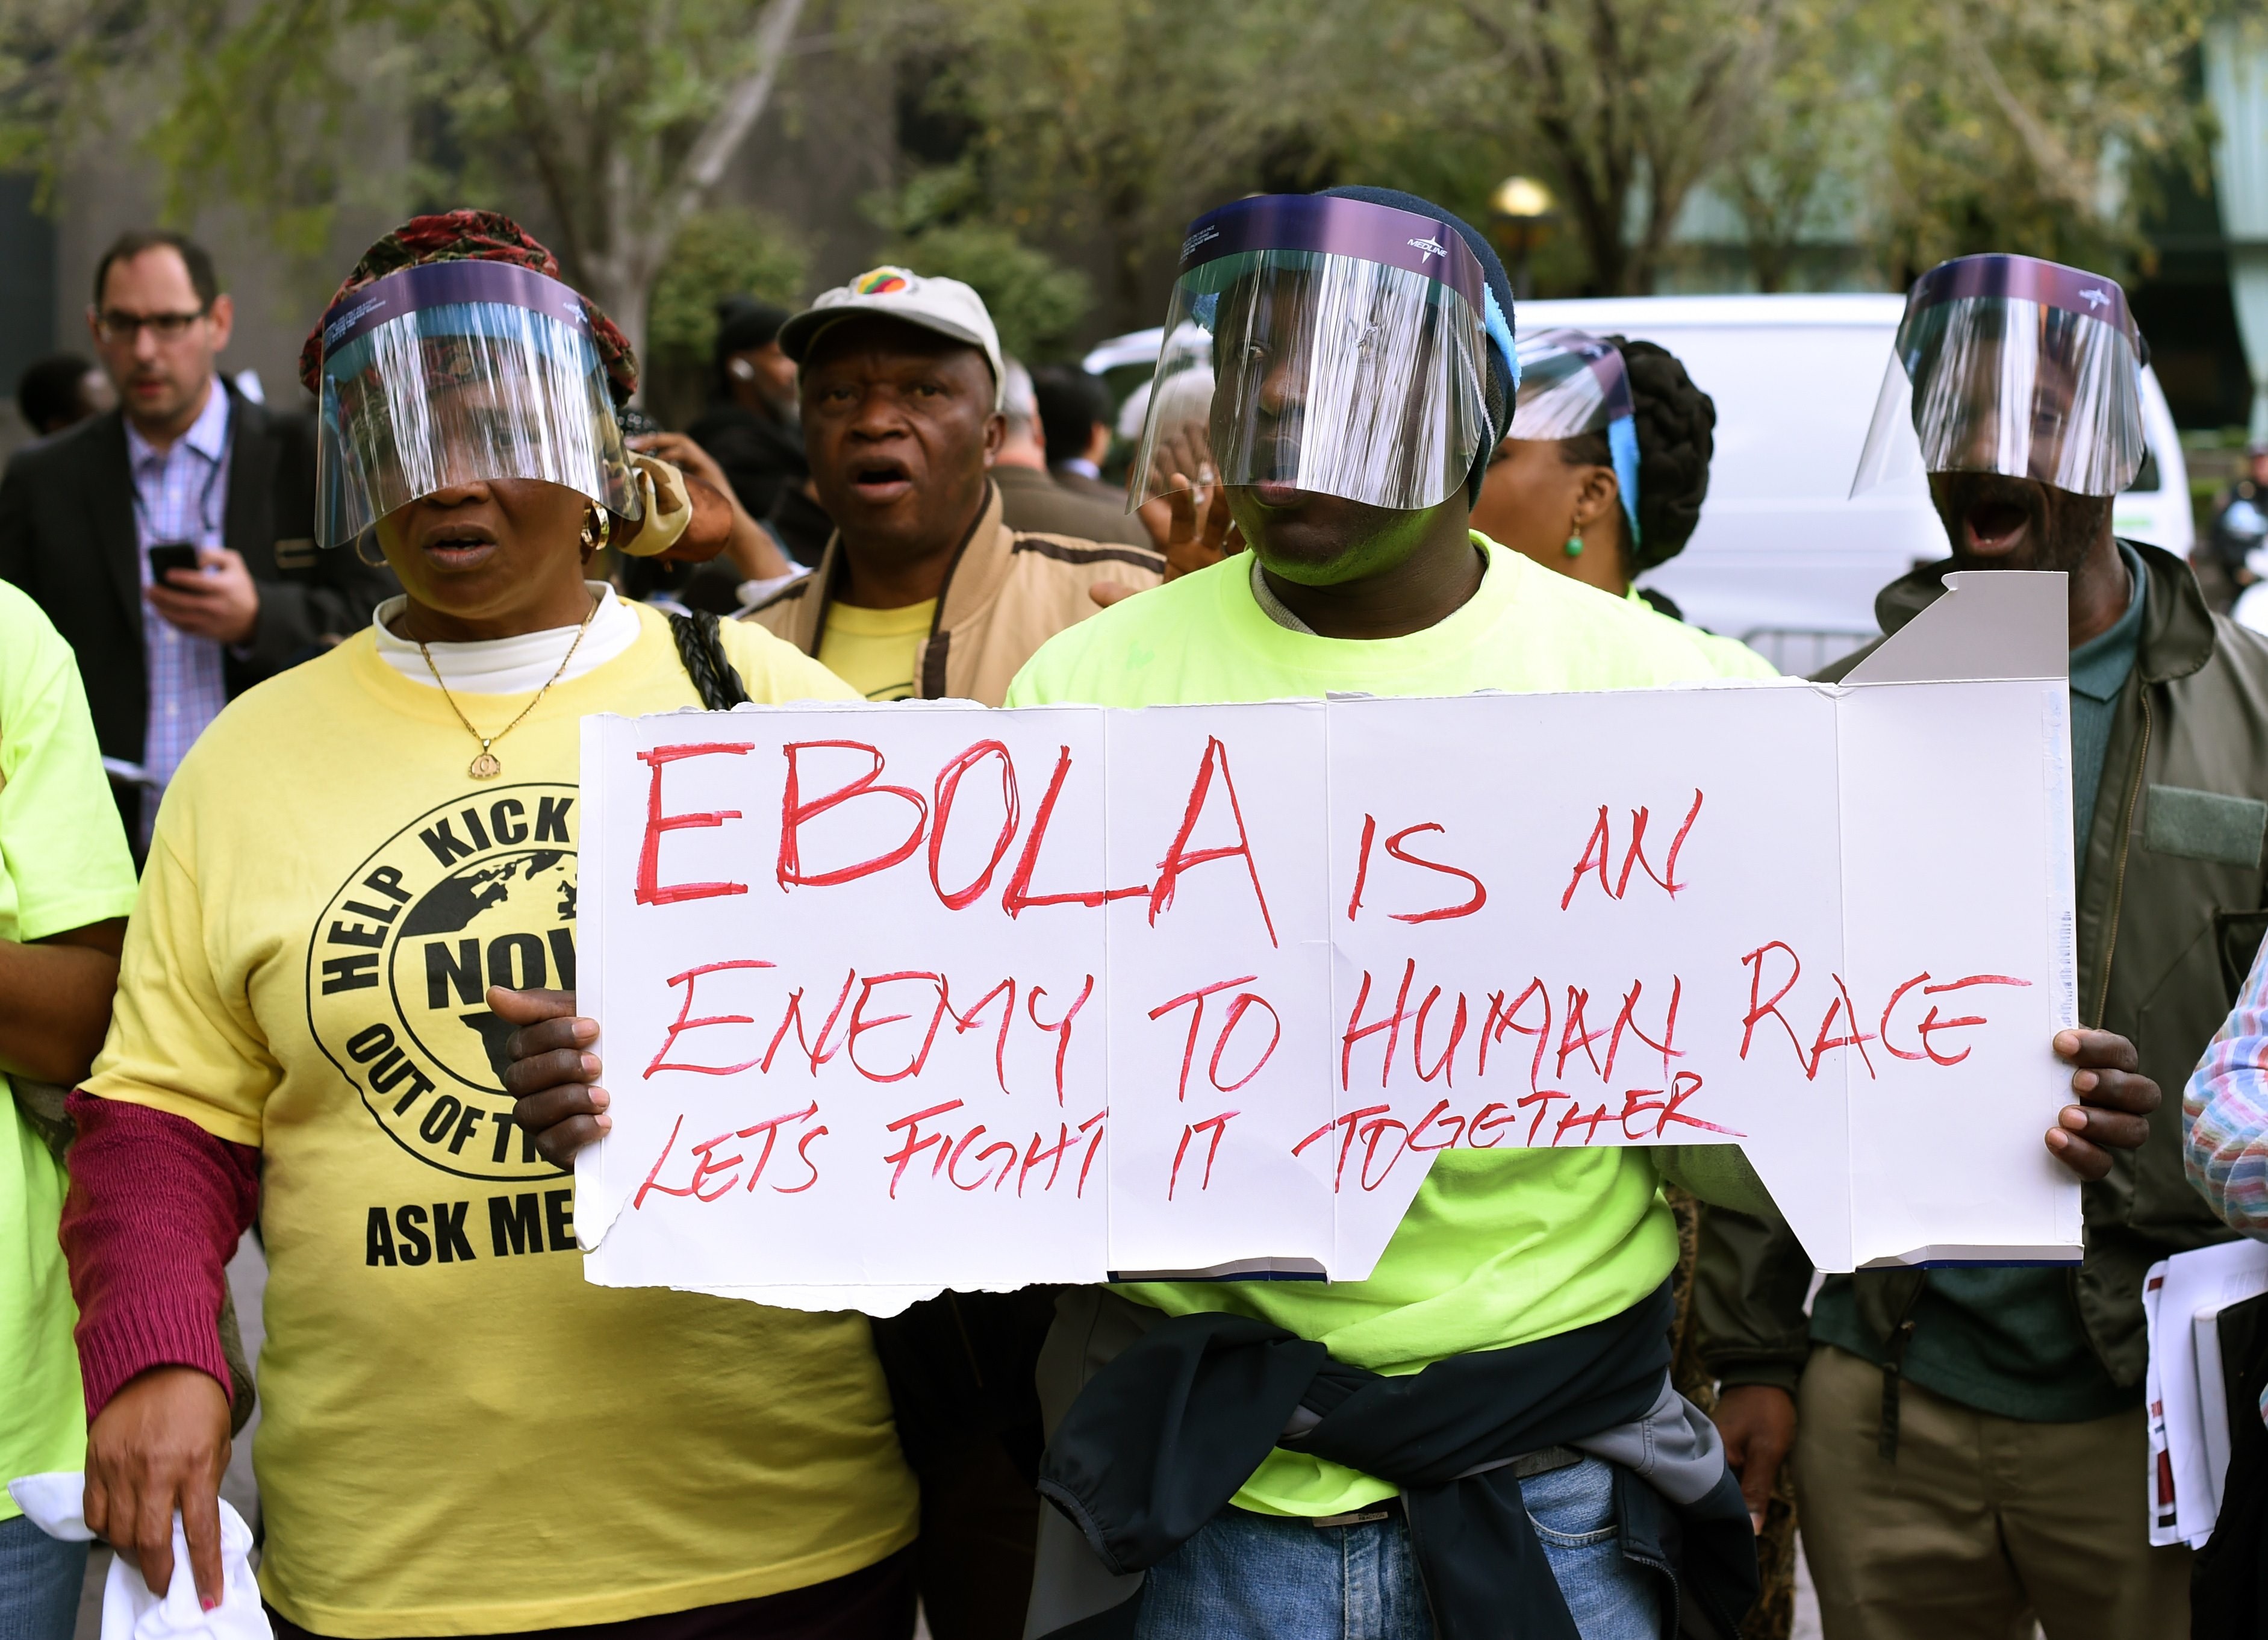 Demonstrators with the United African Congress (UAC) hold a rally for the "Stop Ebola" movement in New York on October 24, 2014 the morning after it was confirmed that Doctor Craig Spencer, a member of Doctors Without Borders, who recently returned to New York from West Africa tested positive for Ebola, making him New York City's first Ebola patient. (TIMOTHY A. CLARY&mdash;AFP/Getty Images)